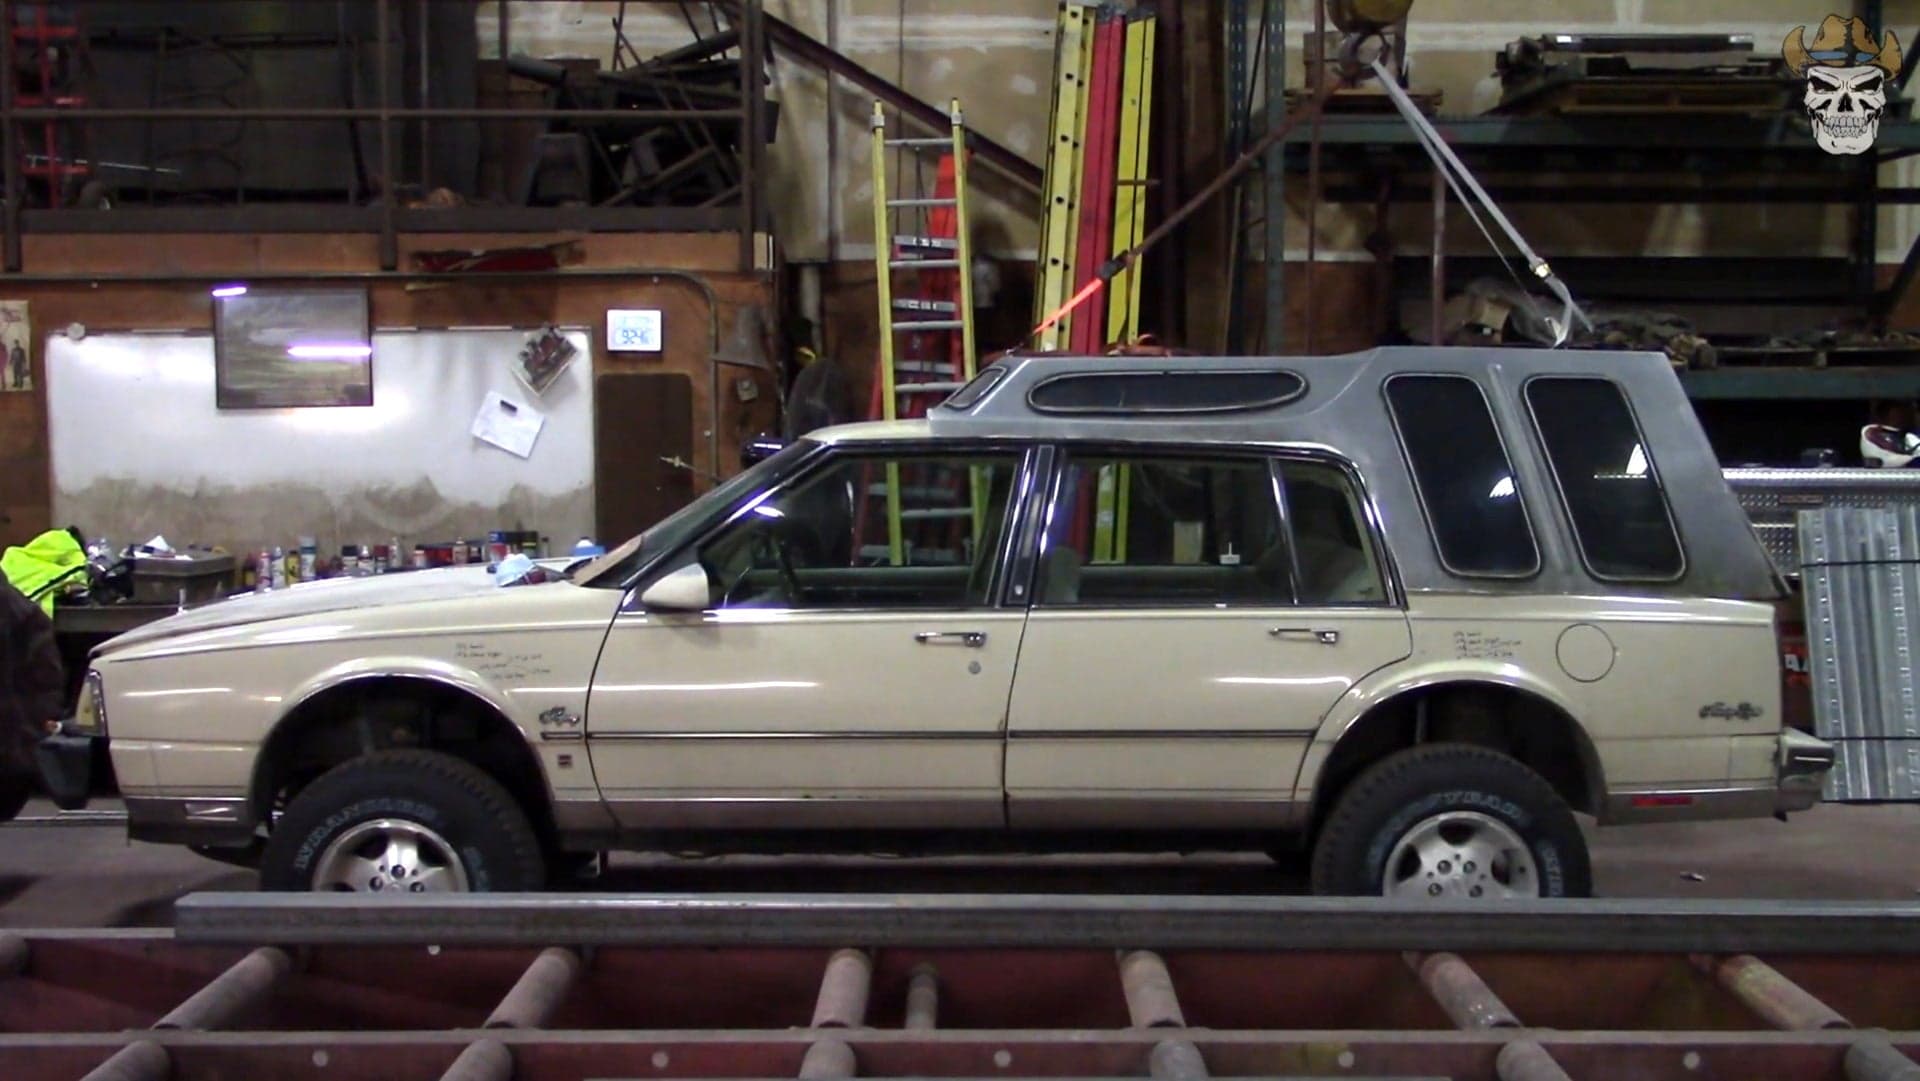 This Lifted 1980s Oldsmobile Sedan With a Camper Shell Totally Works